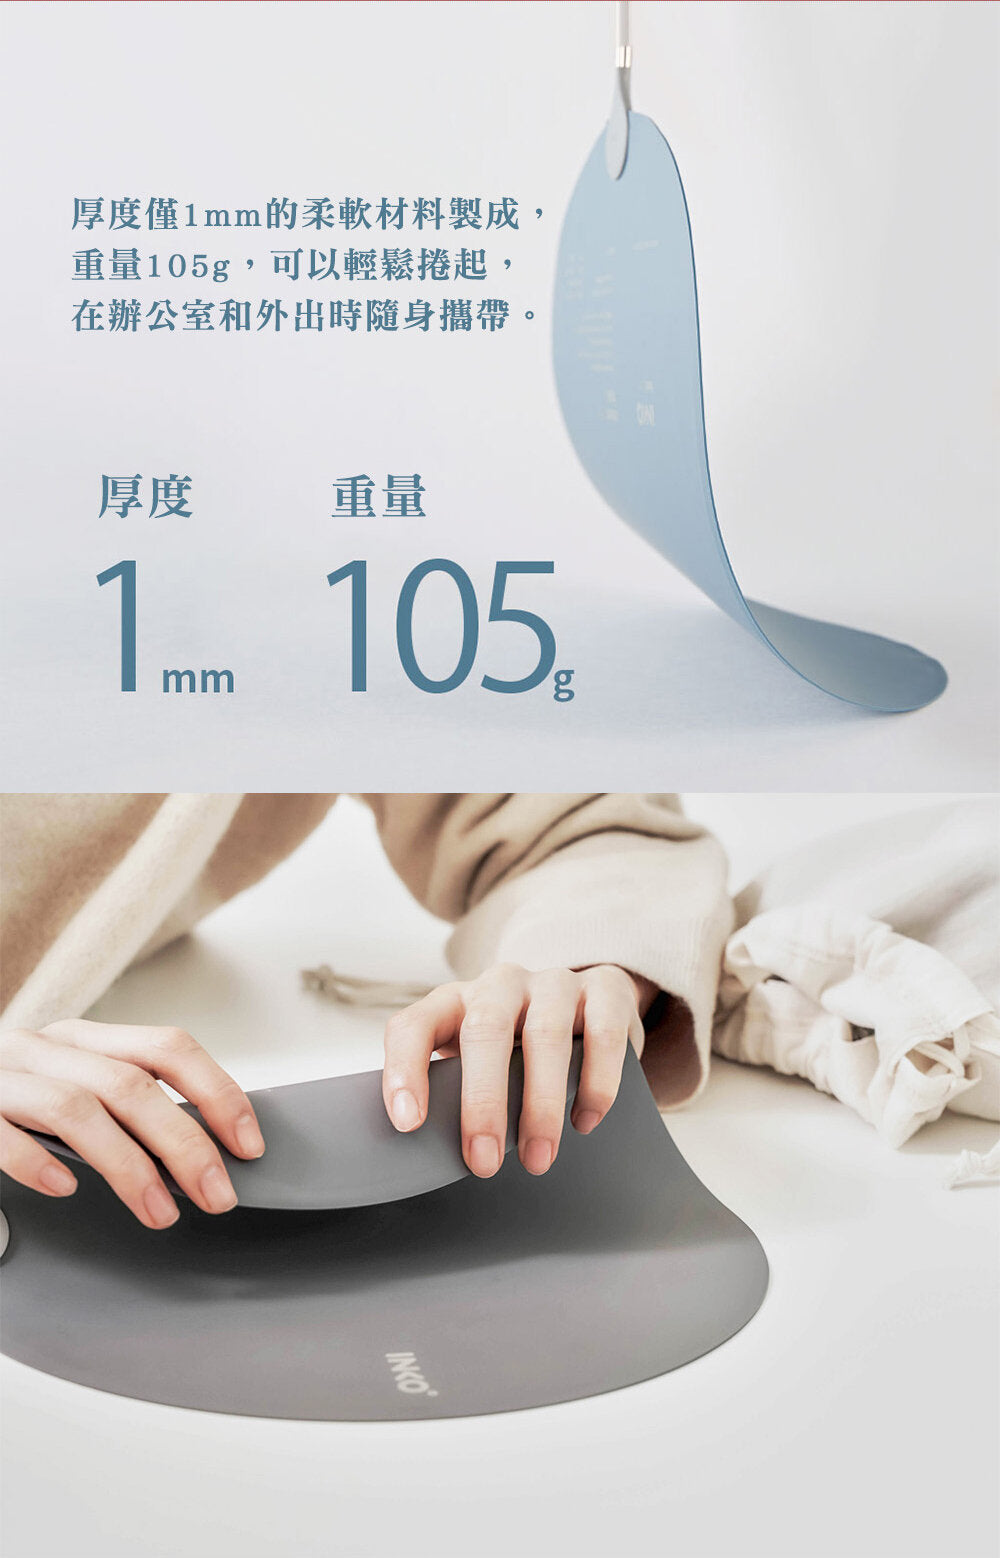 Inko - Smart Heating Mat HEAL ultra-thin thermal pad (suede) PD-S270